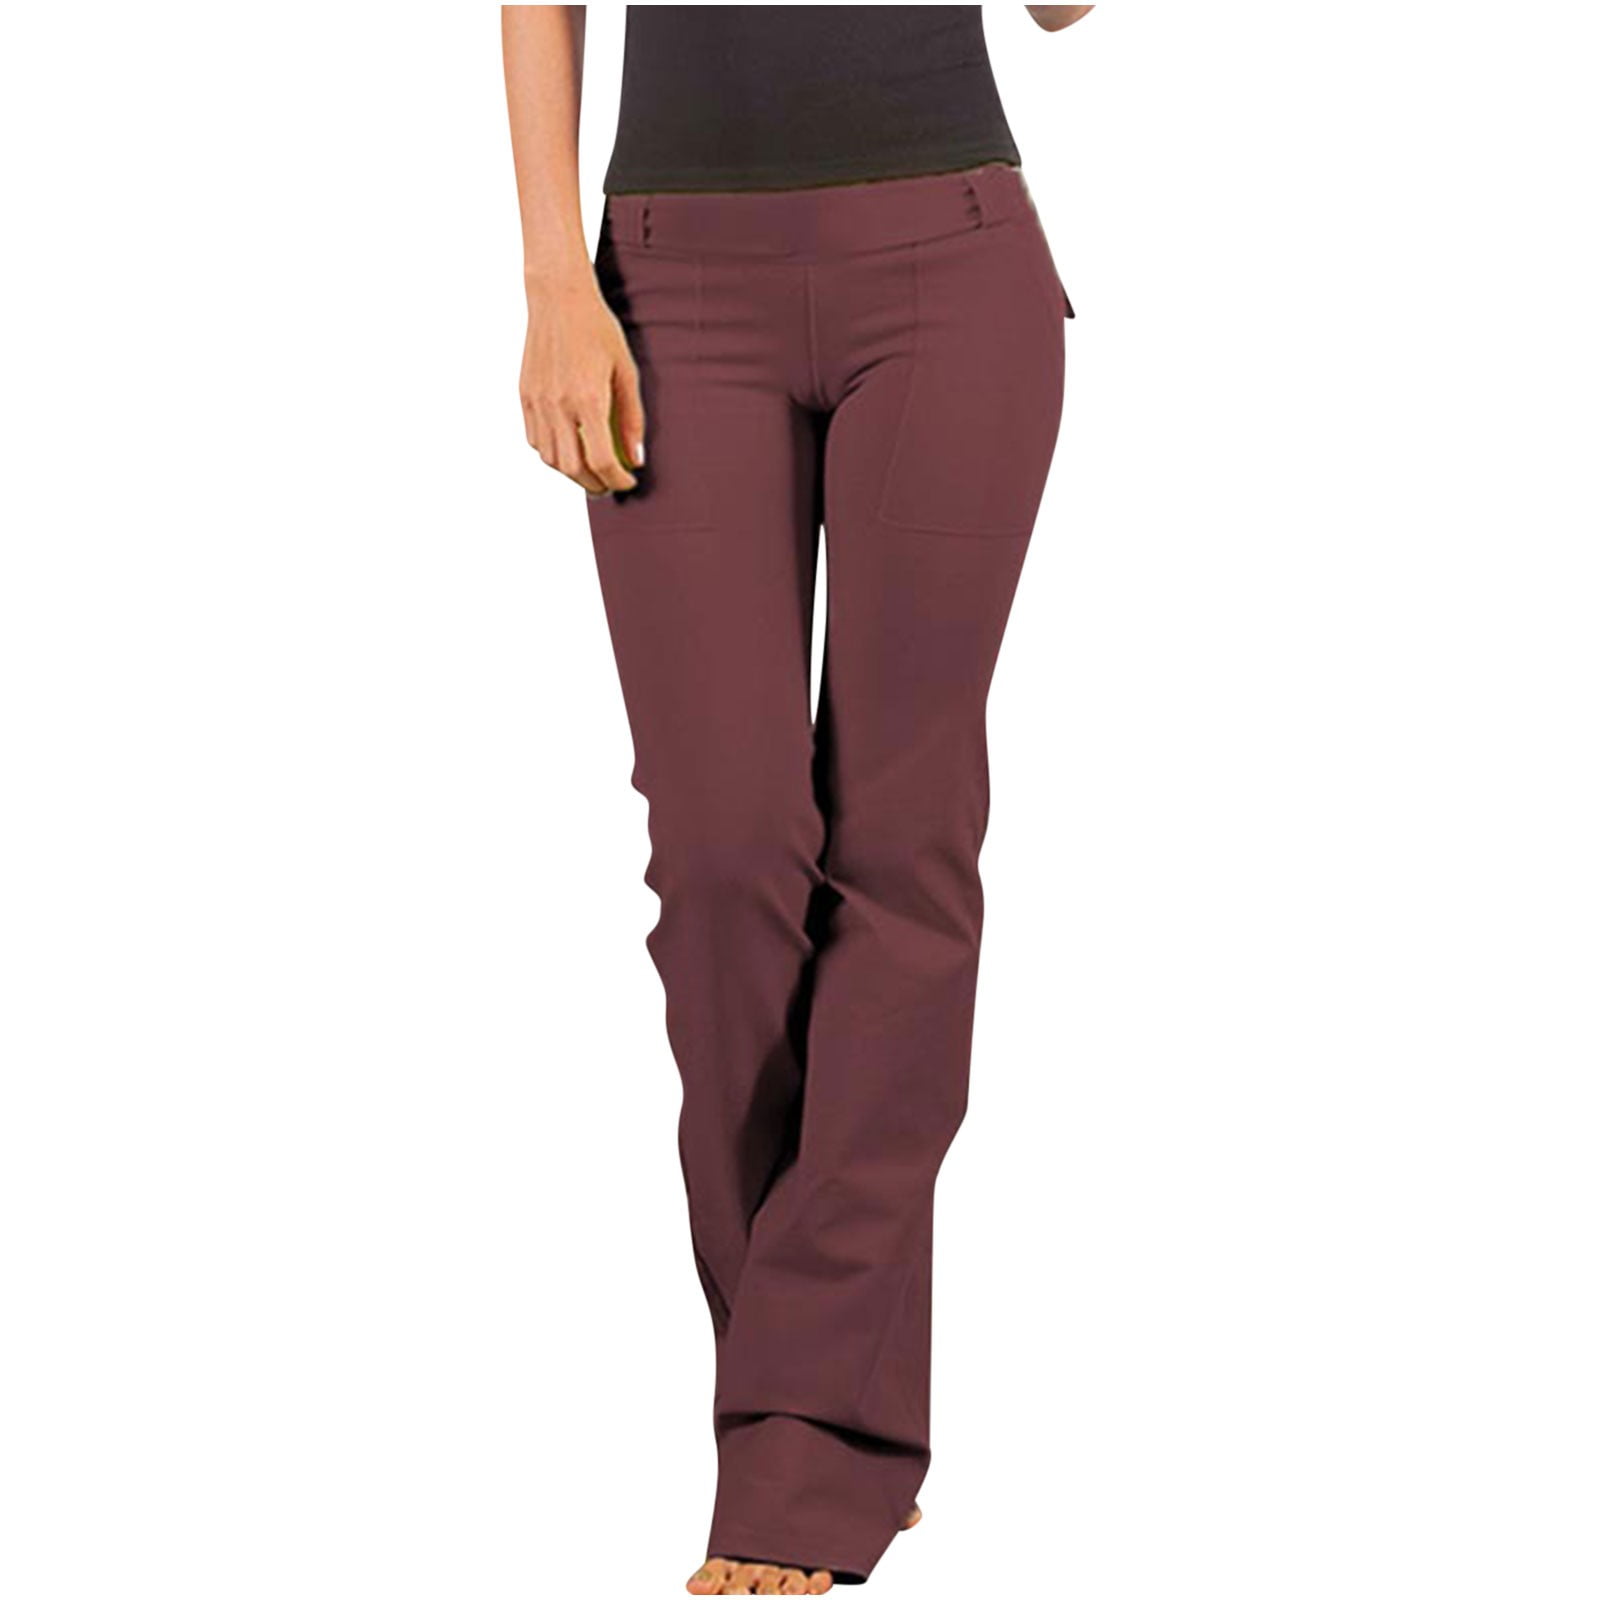 Buy Lovable Women Solid Polyester Spandex Wine Track Pants_XL